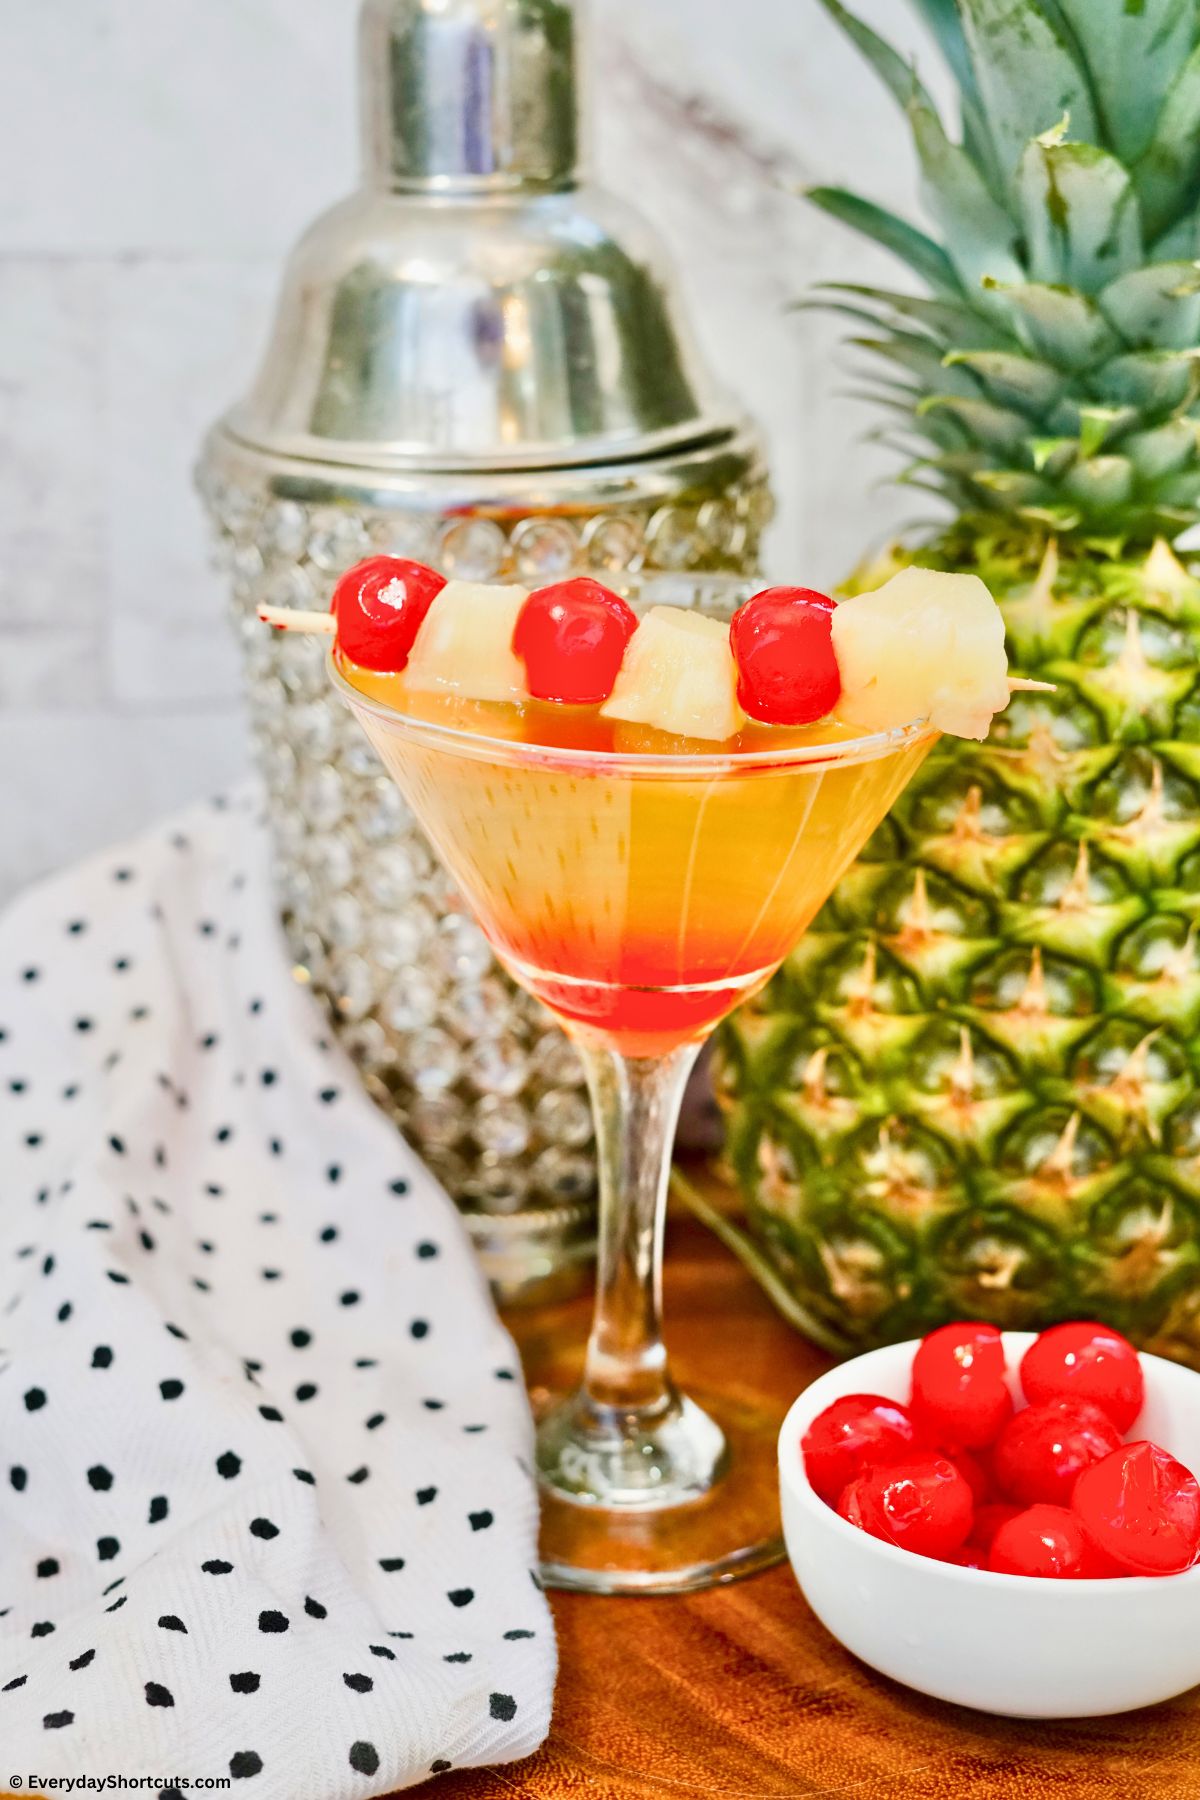 layered summer cocktail garnished with cherries and pineapple